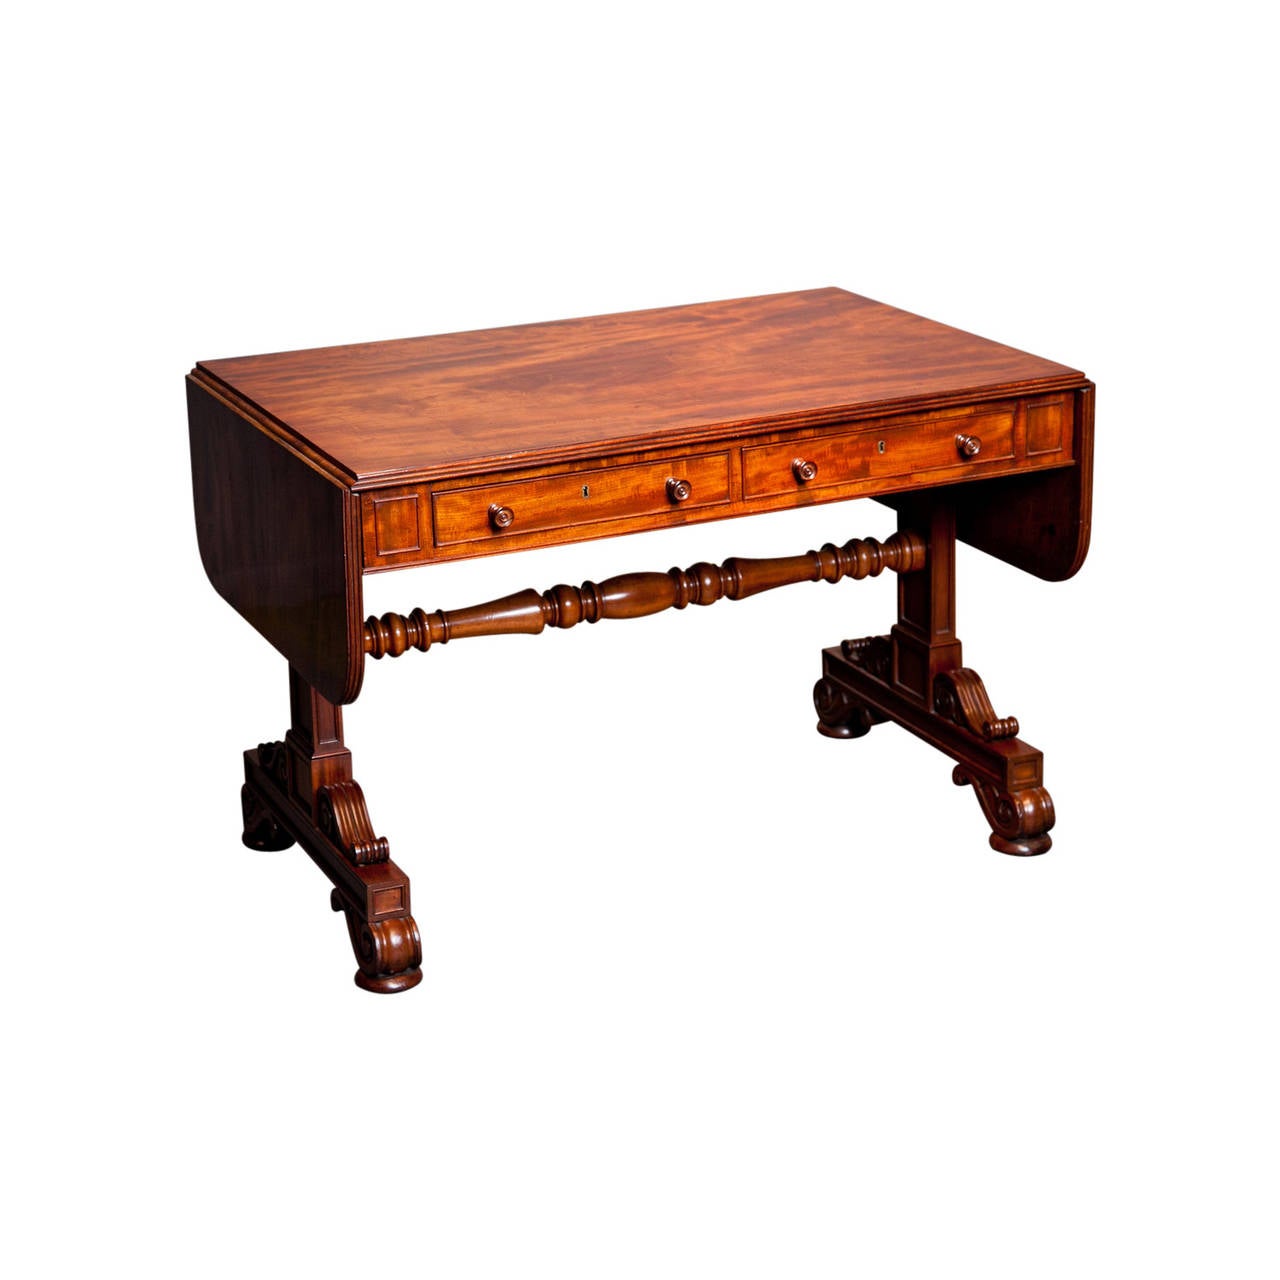 Crafted by Gillows of Lancaster, this exceptional, stamped sofa table exhibits a luminescence only found in mahogany pieces of the highest quality and grain.

 The drop-leaf table employs extremely precise dovetail joints at each side, while the